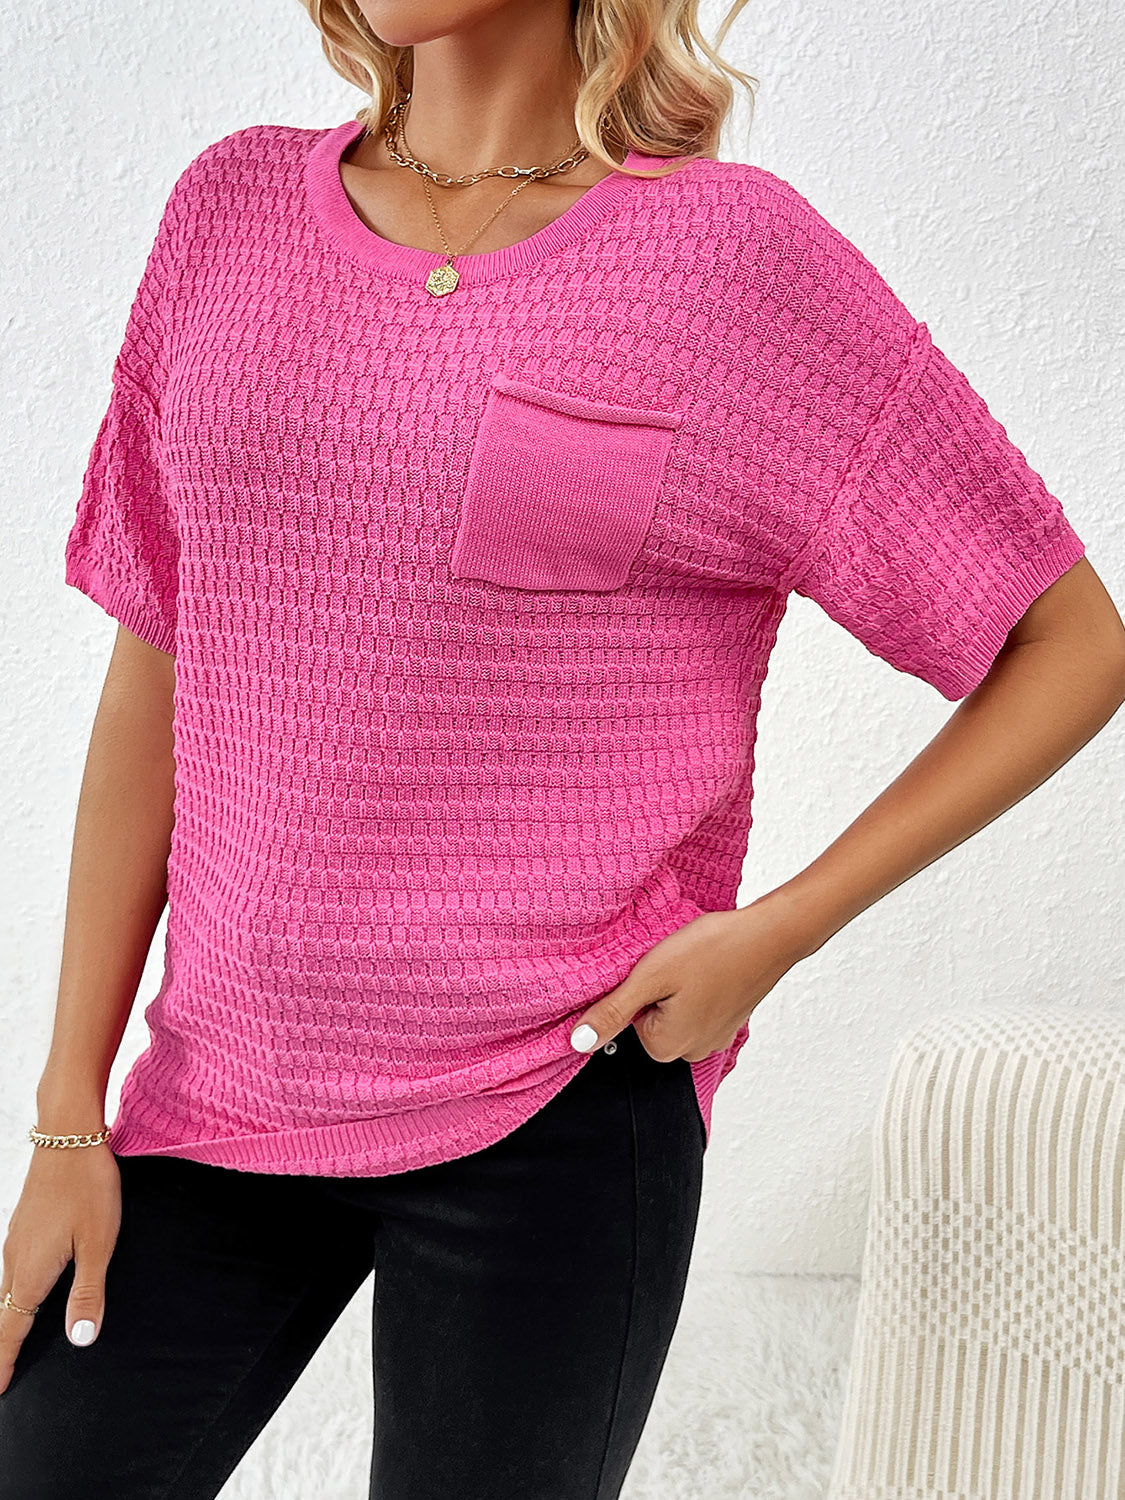 Pink Short Sleeve Knit Top